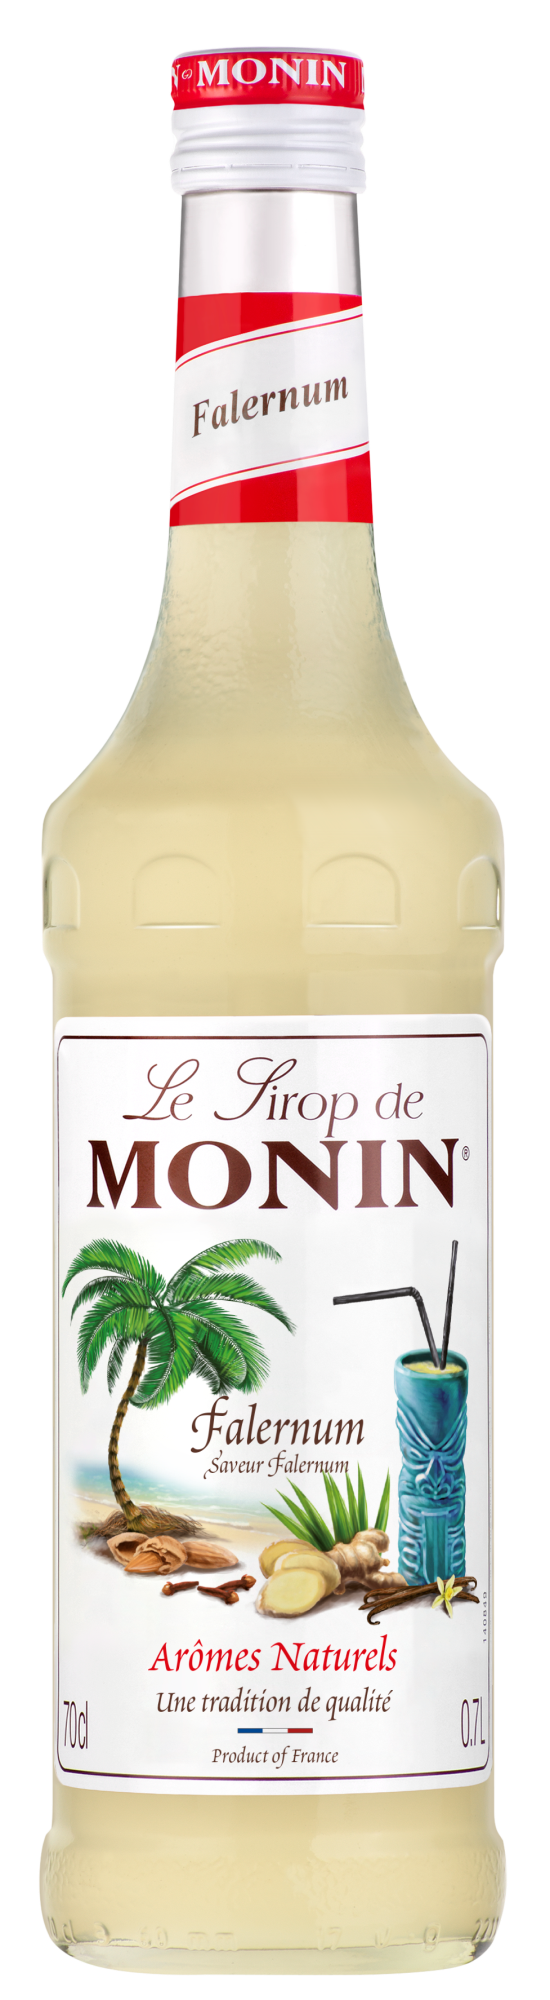 Buy MONIN Falernum Syrup. It captures the tropical notes of lime, almond, ginger and cloves and adds a tiki twist.